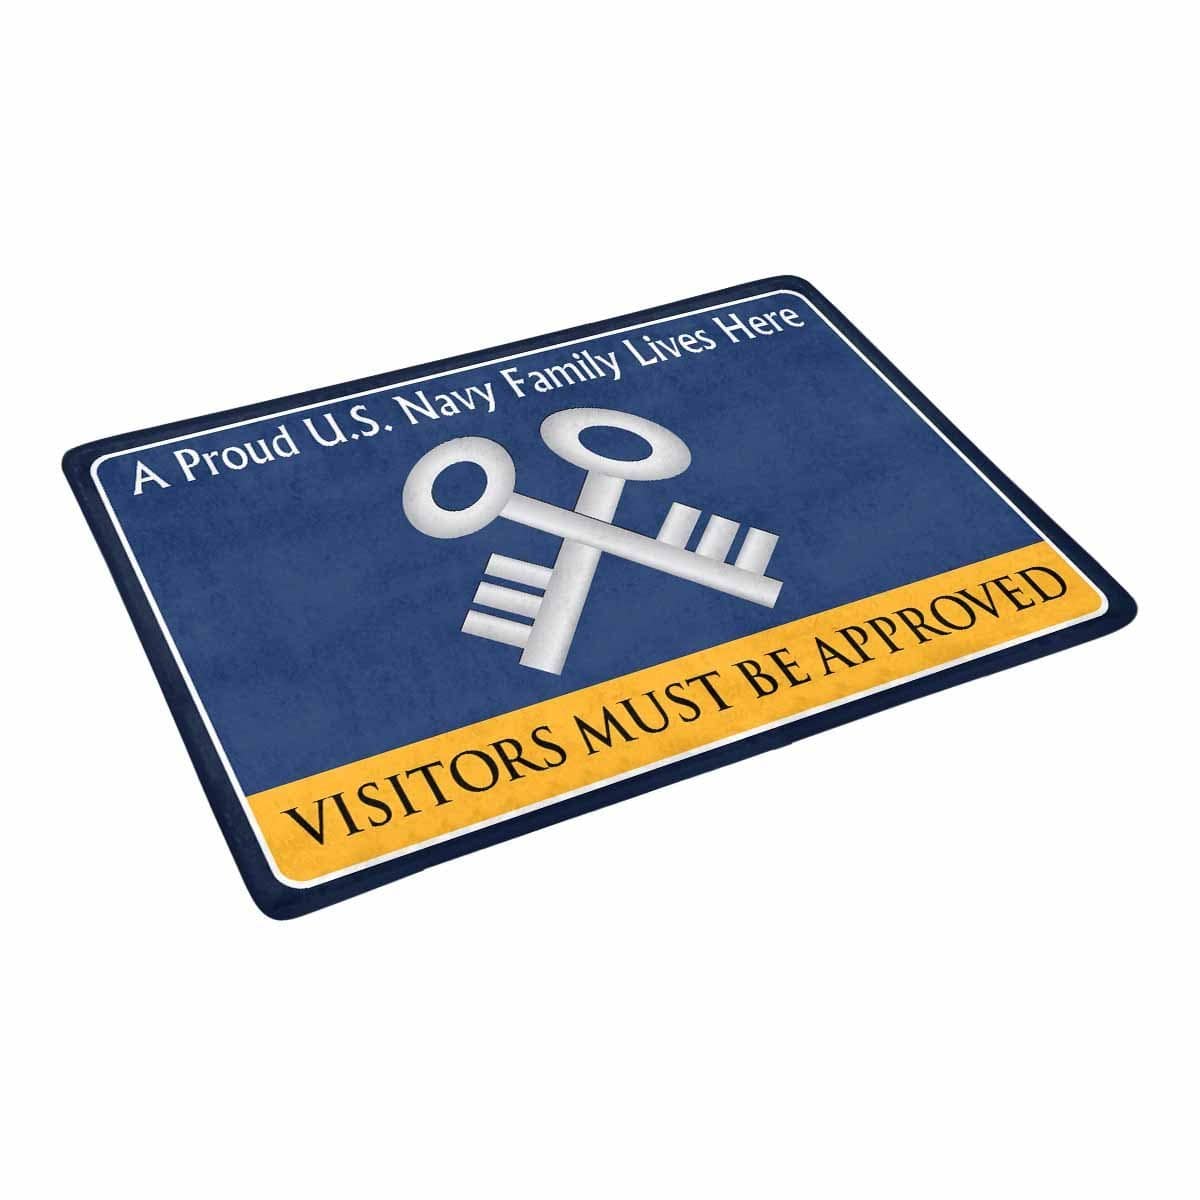 U.S Navy Logistics specialist Navy LS Family Doormat - Visitors must be approved (23,6 inches x 15,7 inches)-Doormat-Navy-Rate-Veterans Nation